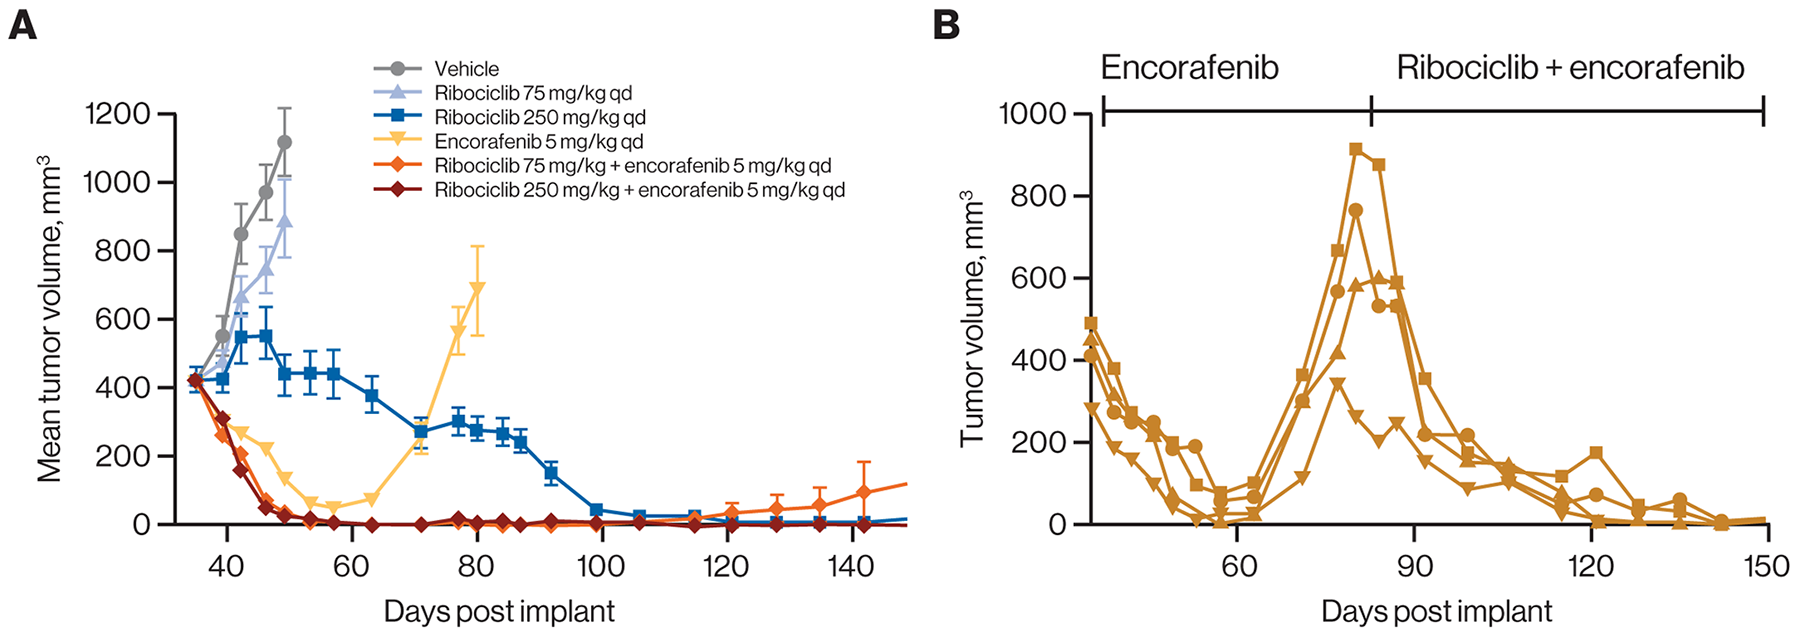 Ribociclib prevents emergence of resistance under treatment when combined with encorafenib in a BRAF-mutant melanoma model.